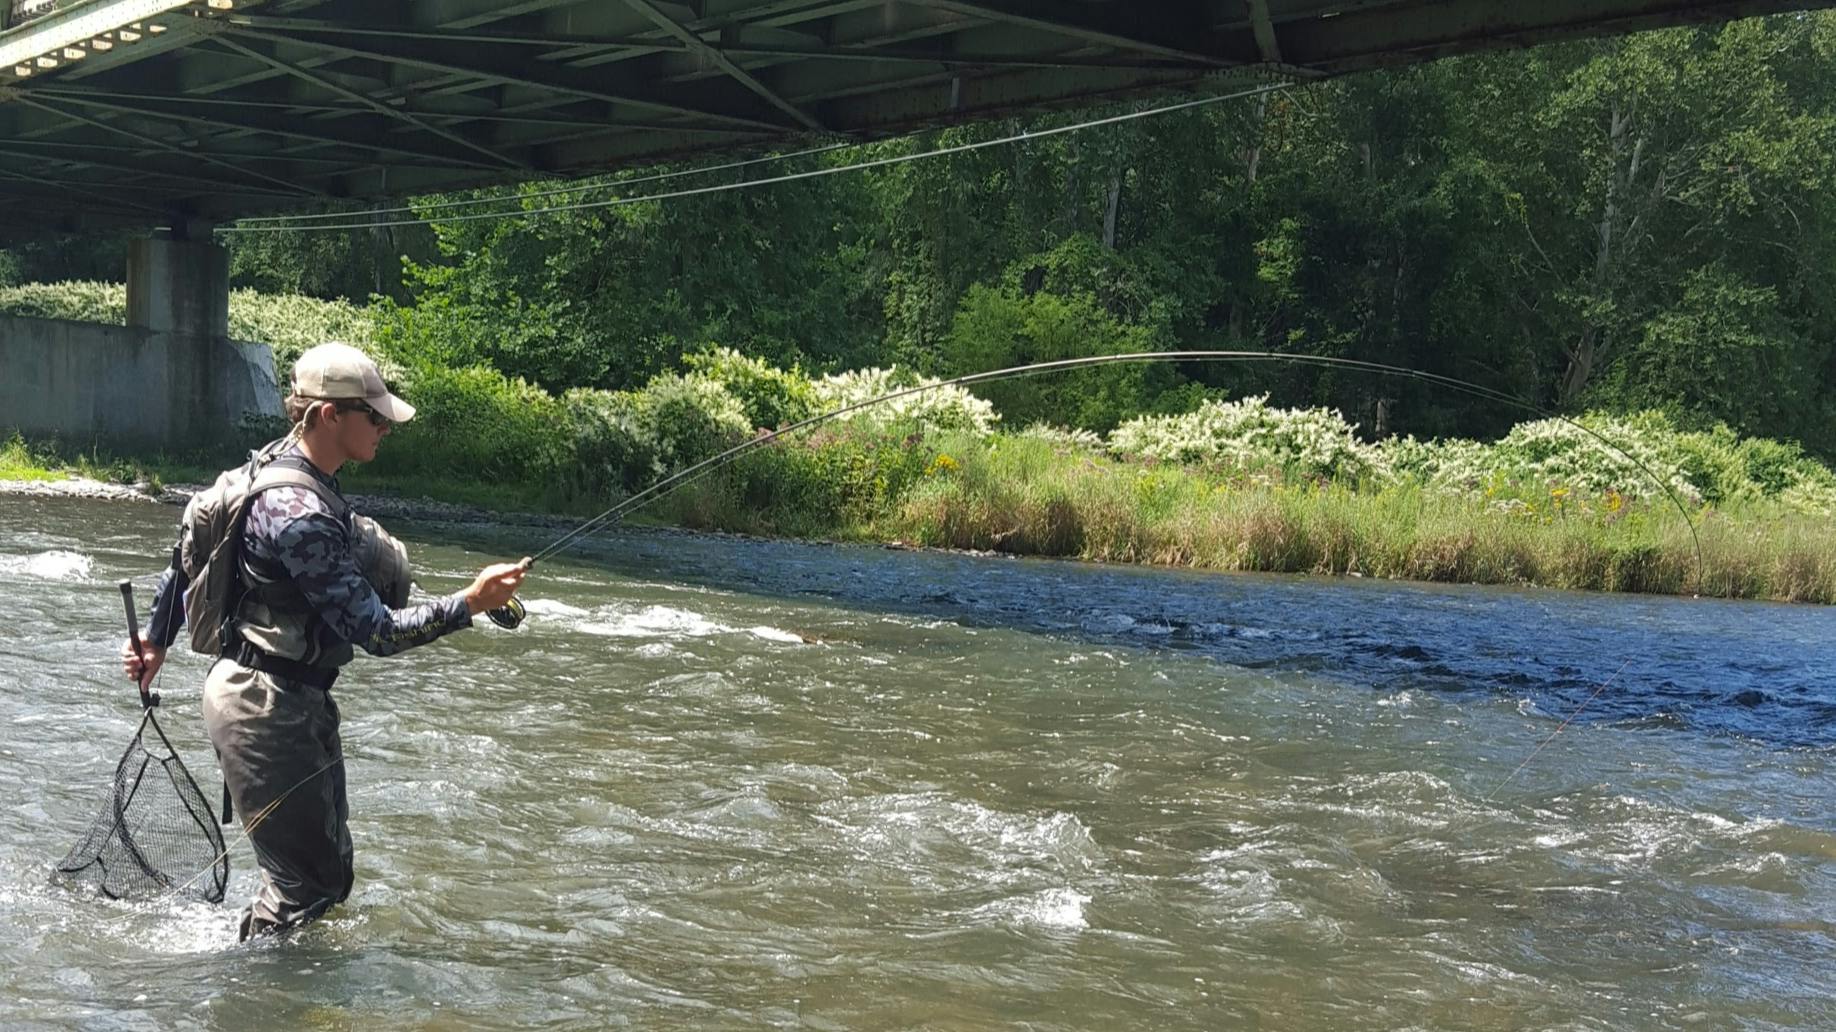 A man stands in a river under a bridge holding a fly fishing rod in one hand and a net in another